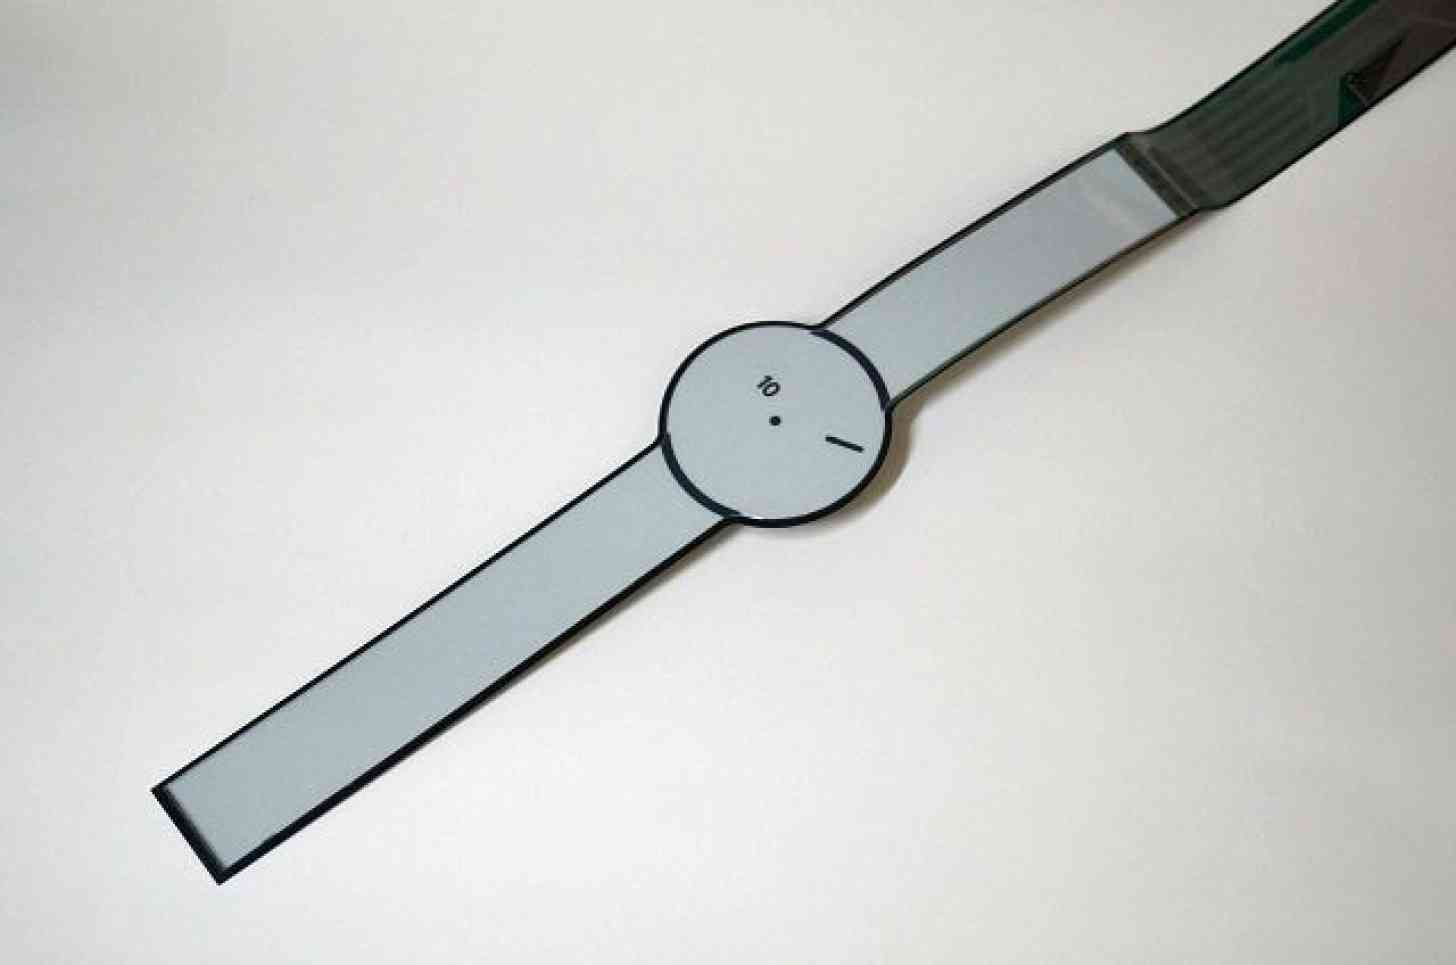 Sony's new smartwatch uses e-Paper tech and it's very expensive | TechRadar